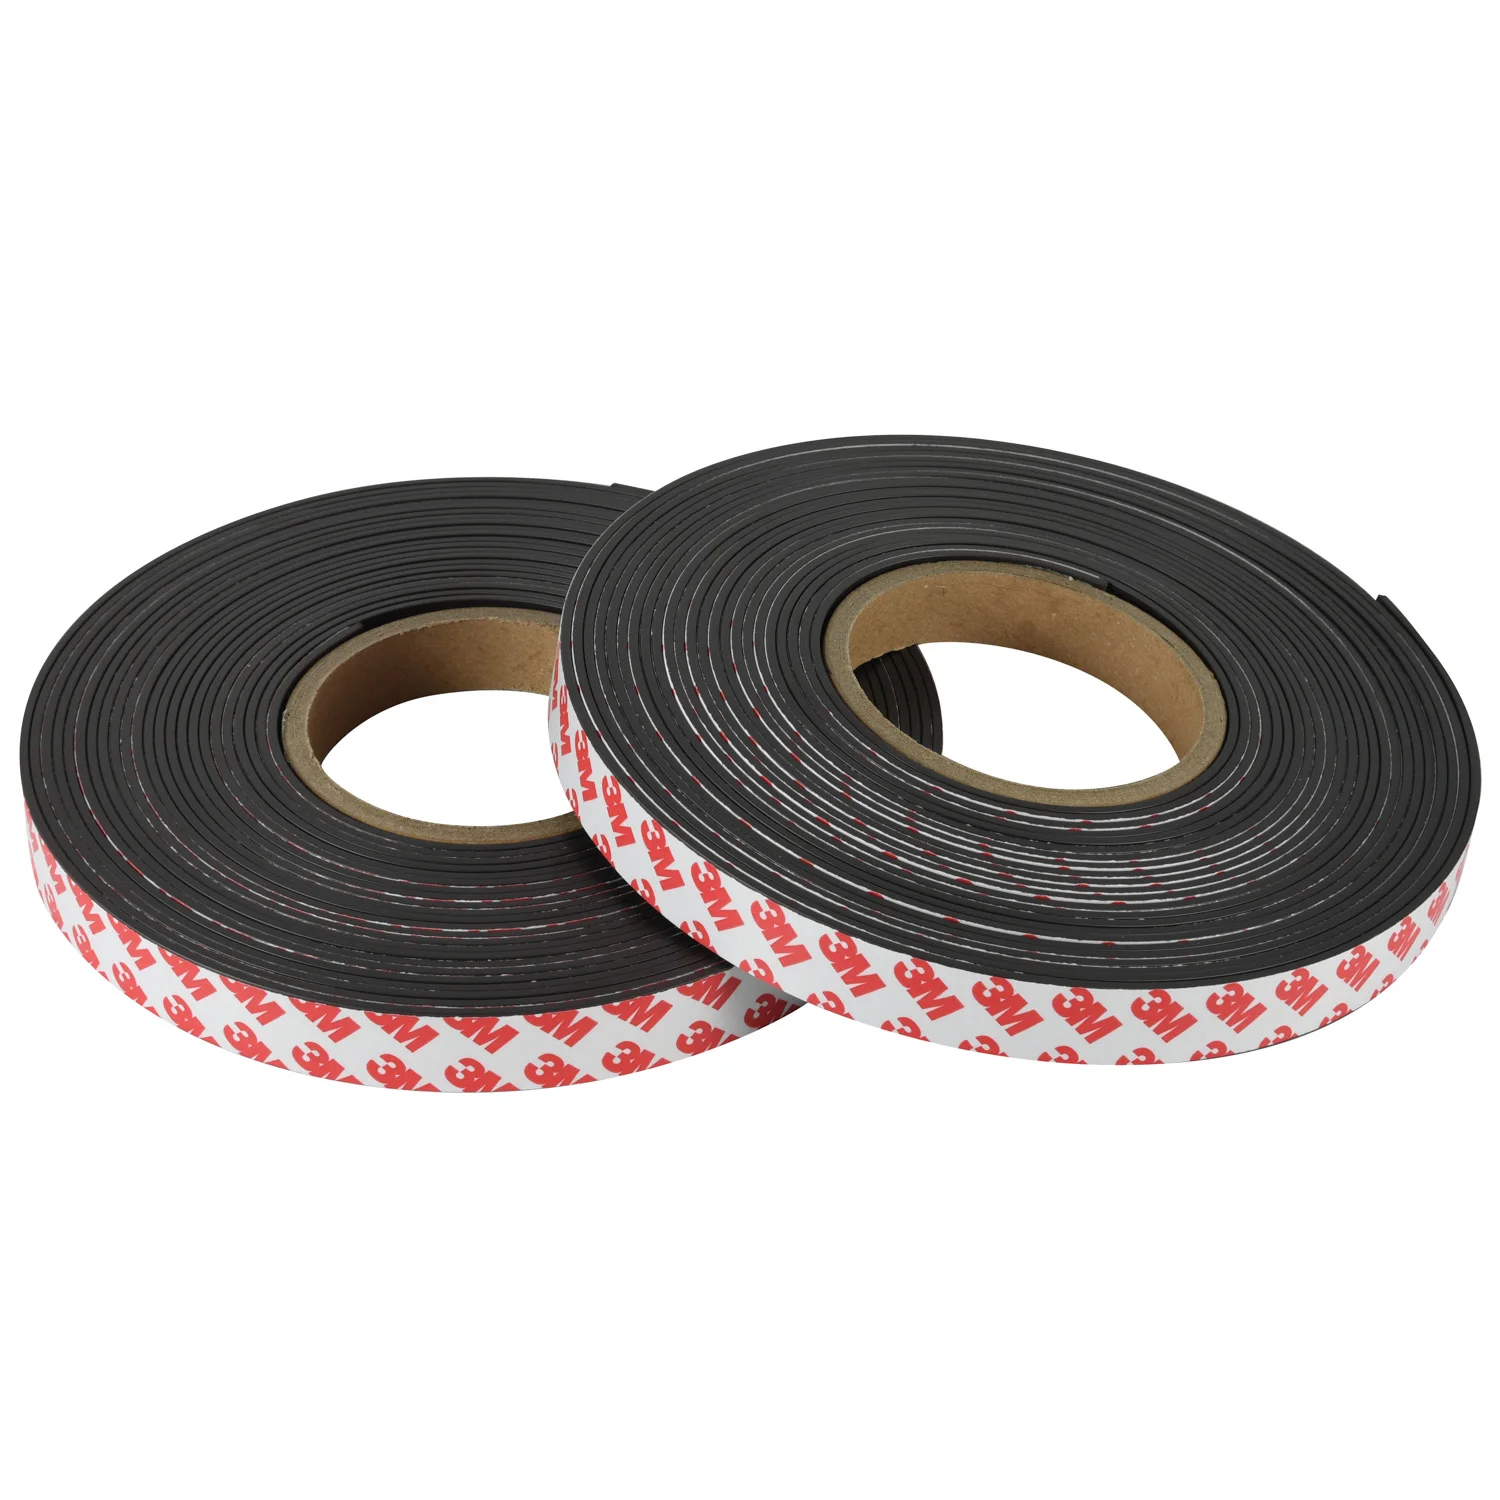 3M Flexible Rubber Self Adhesive Magnet Magnetic Tape Strip Craft Width  10mm-50m